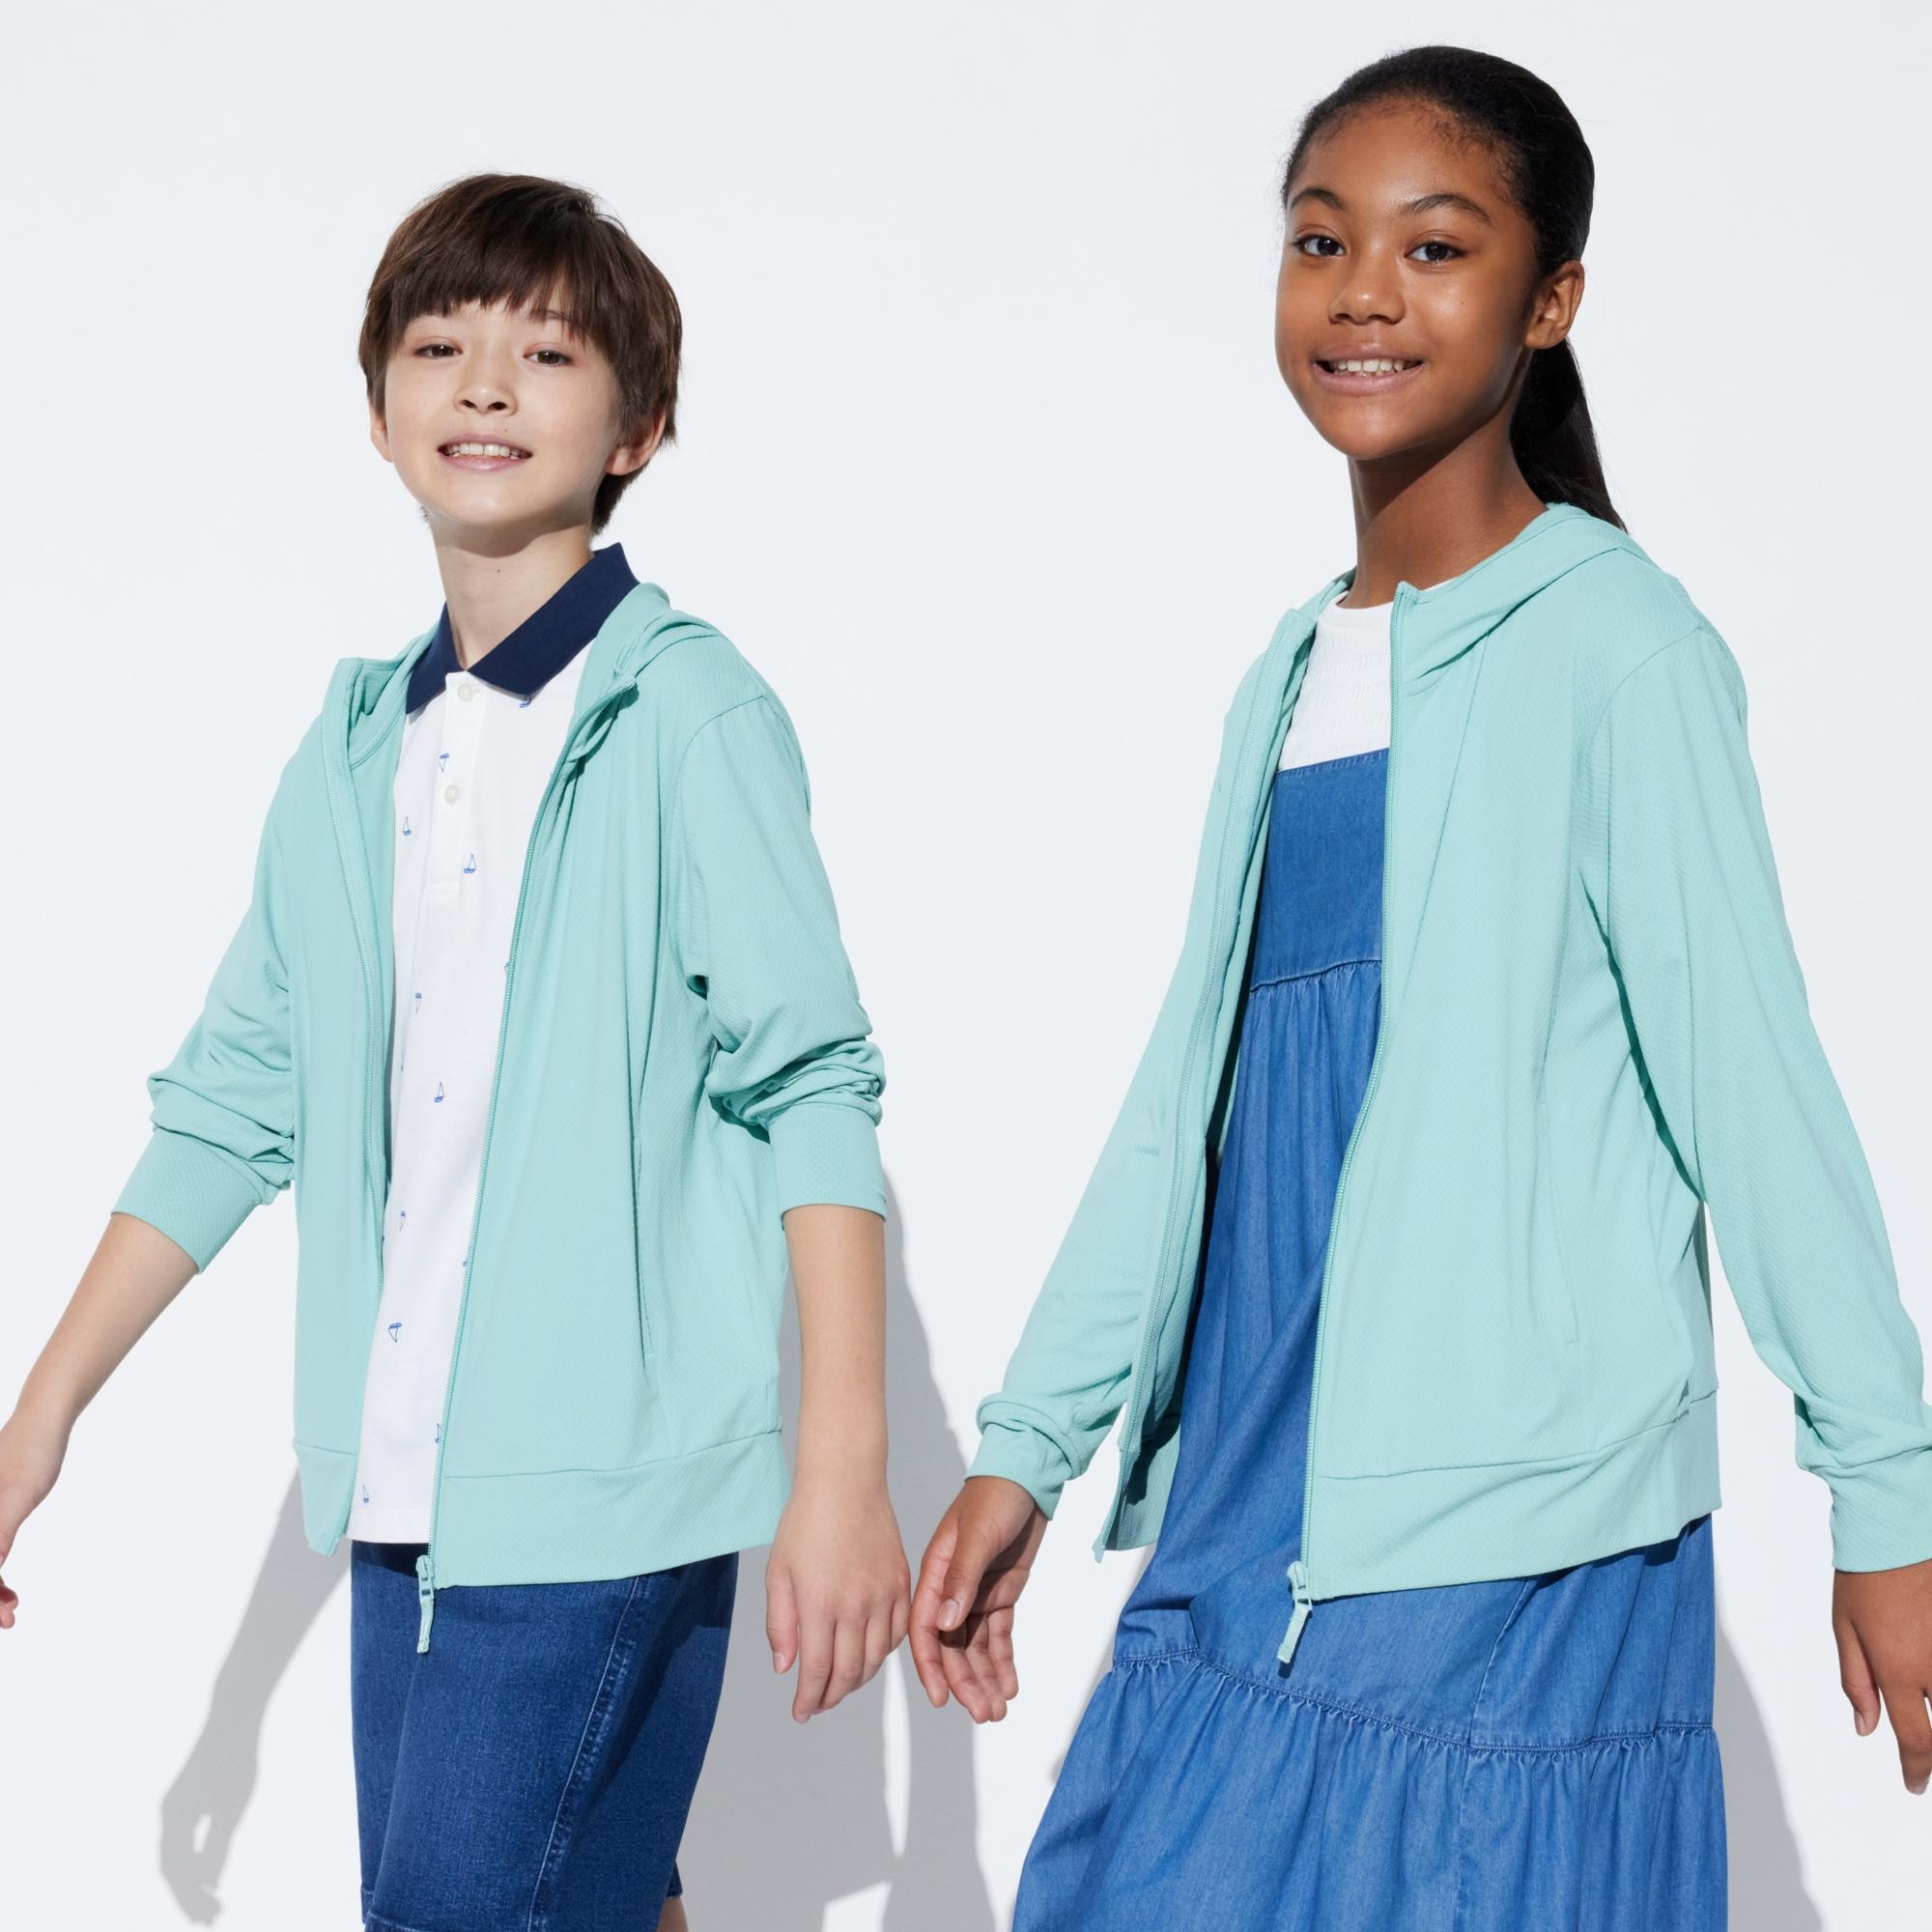 UNIQLO Expands its Kids and Babies Collection  Greater variety of items  and new material developed for kids  all more widely available  FAST  RETAILING CO LTD